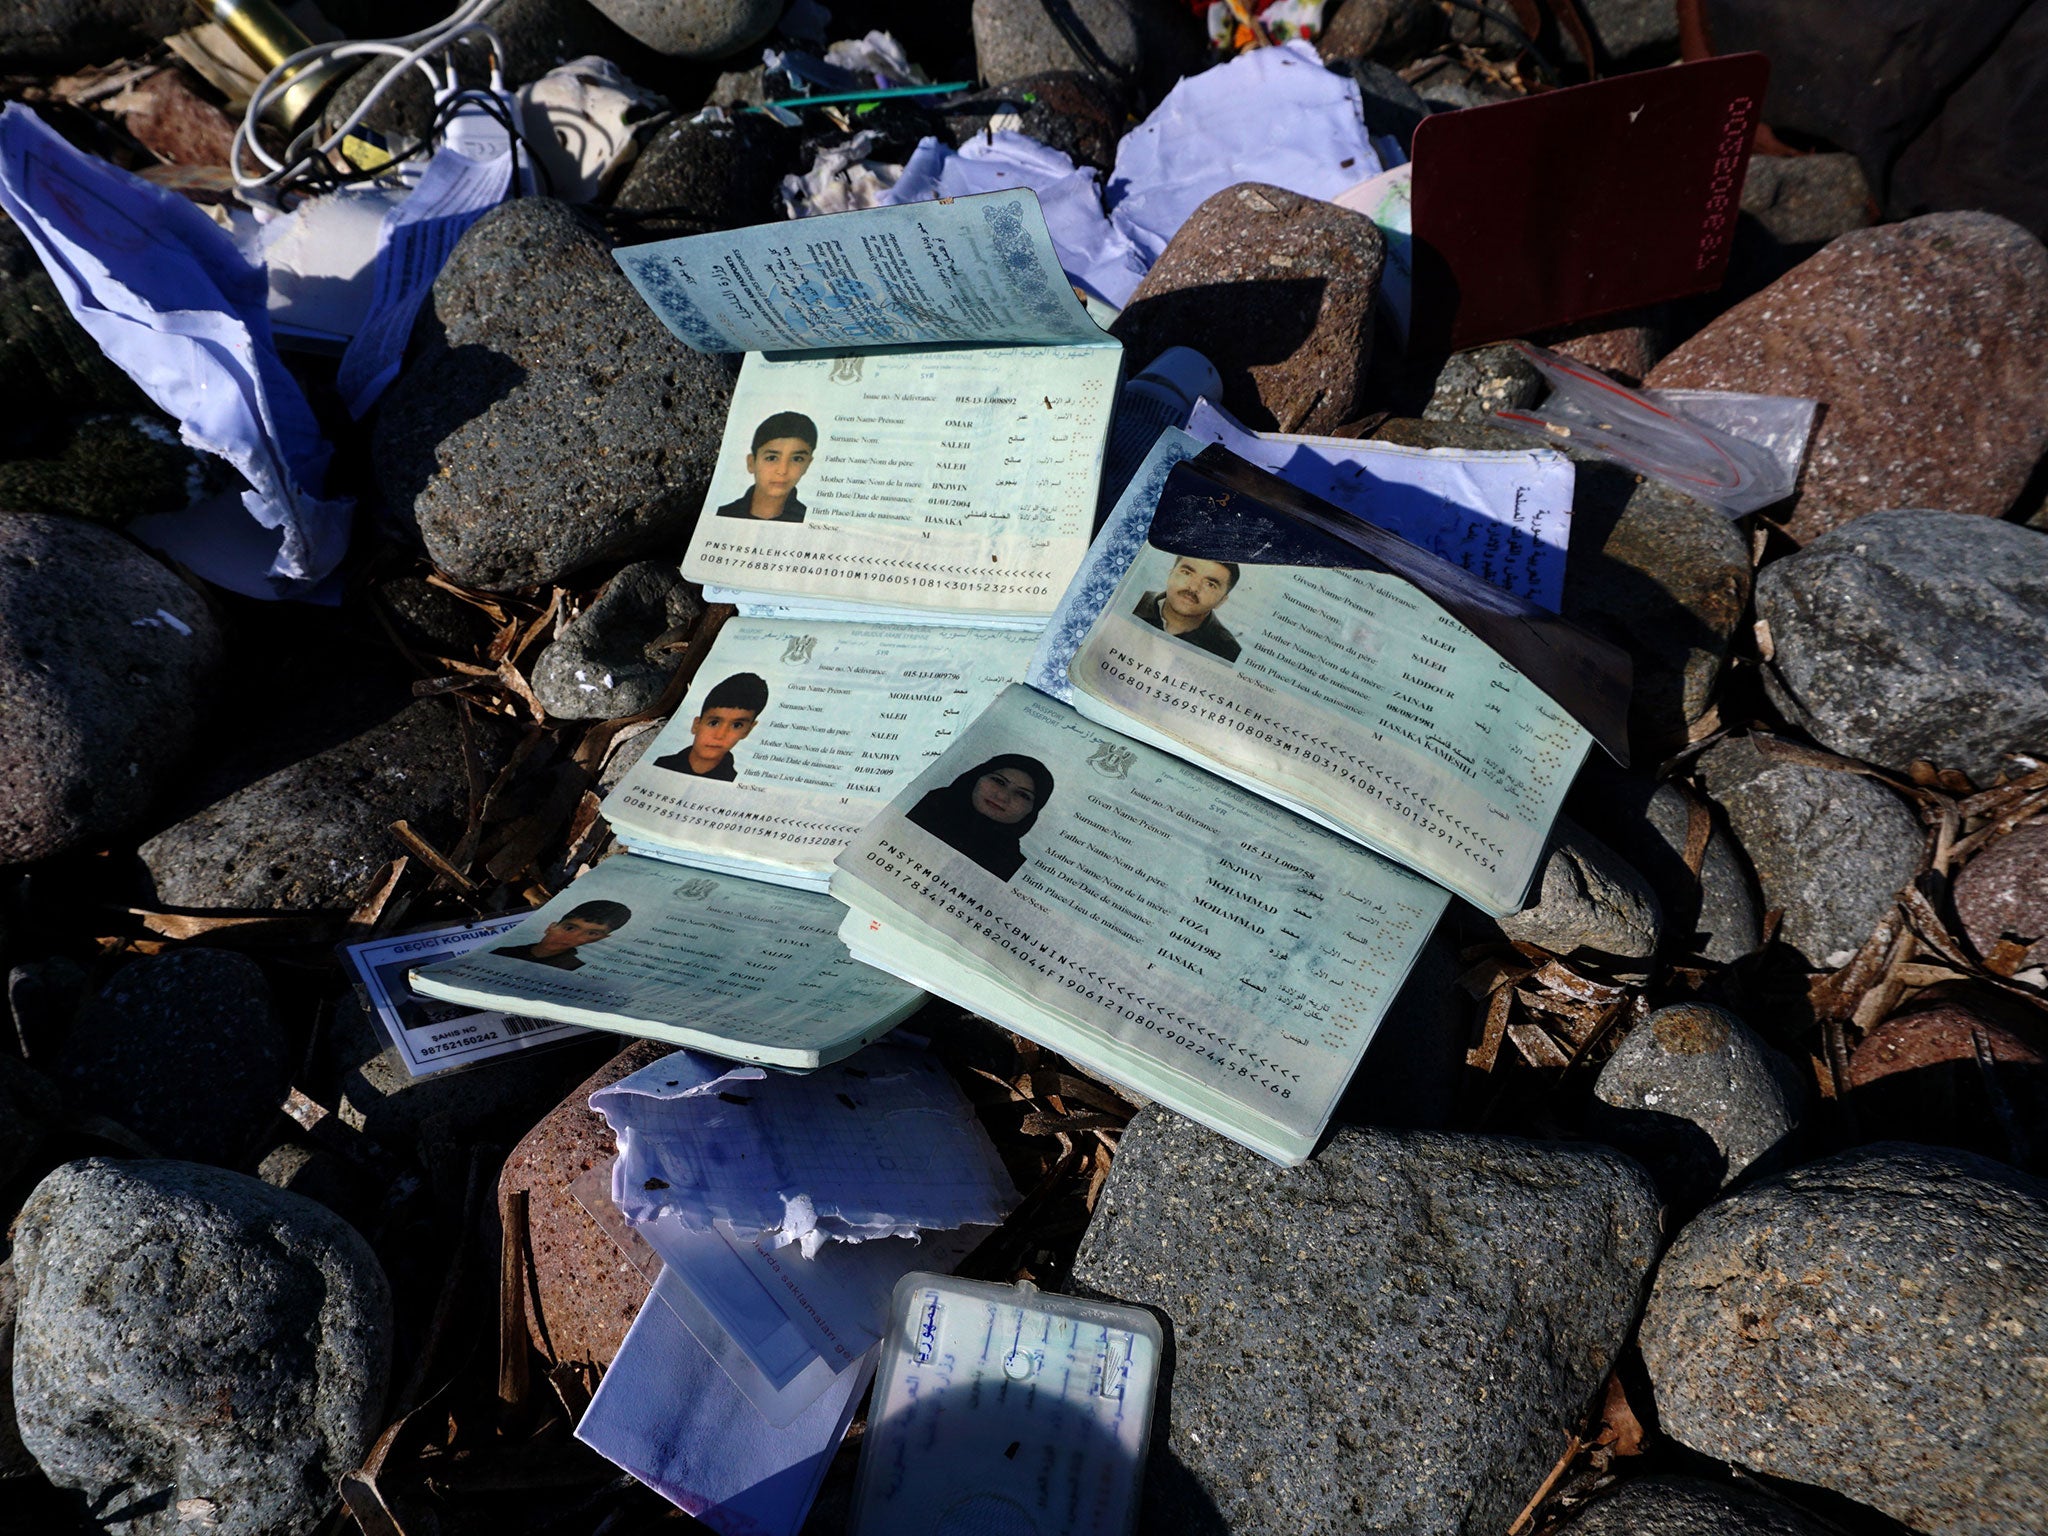 A picture taken on October 30, 2015 shows the passports of members of a family who drowned after the boat transporting them sank, on a beach on the Greek island of Lesbos.